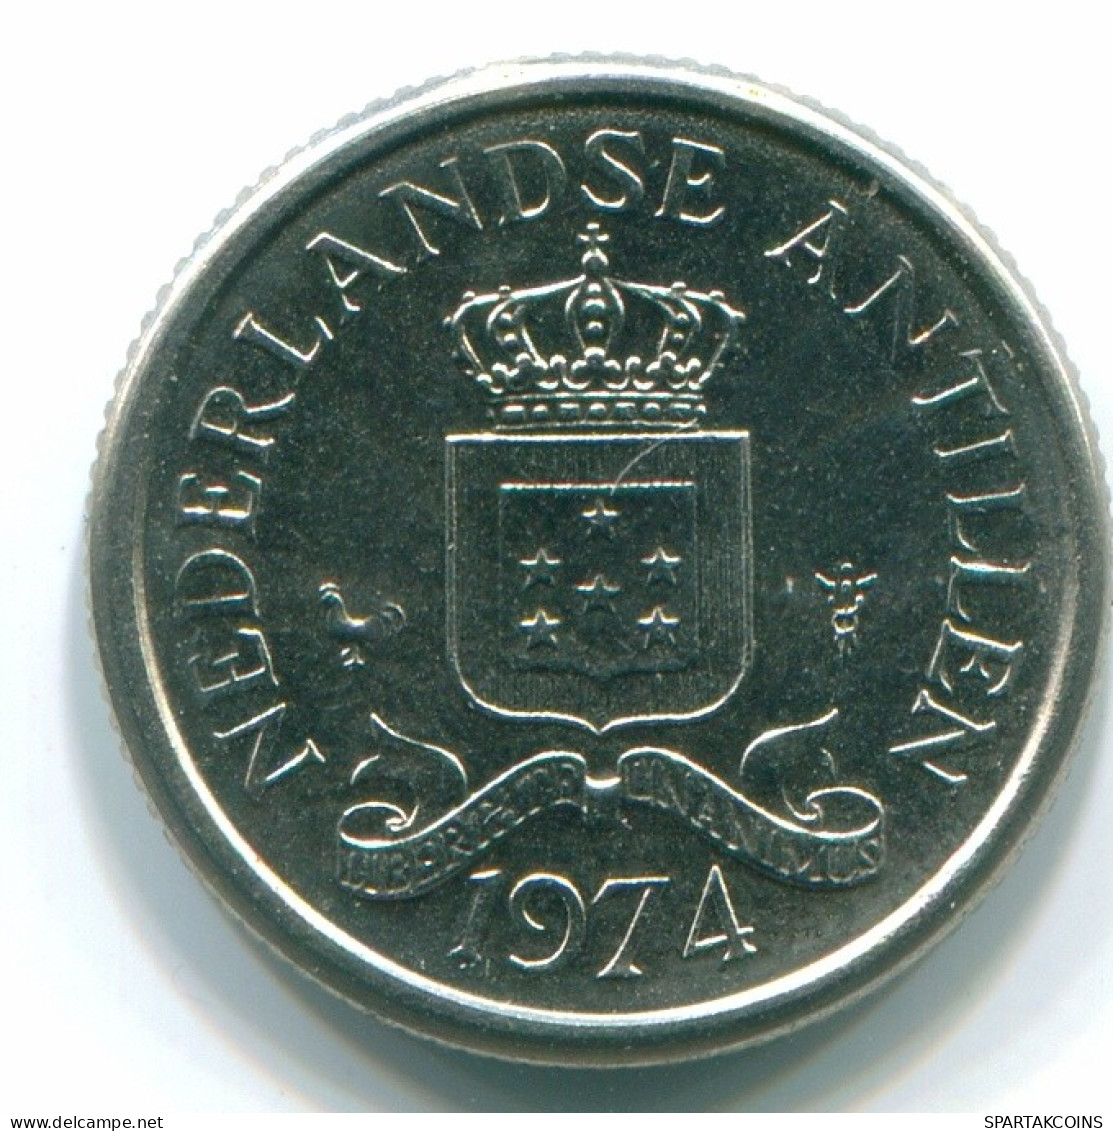 10 CENTS 1974 NETHERLANDS ANTILLES Nickel Colonial Coin #S13512.U.A - Netherlands Antilles